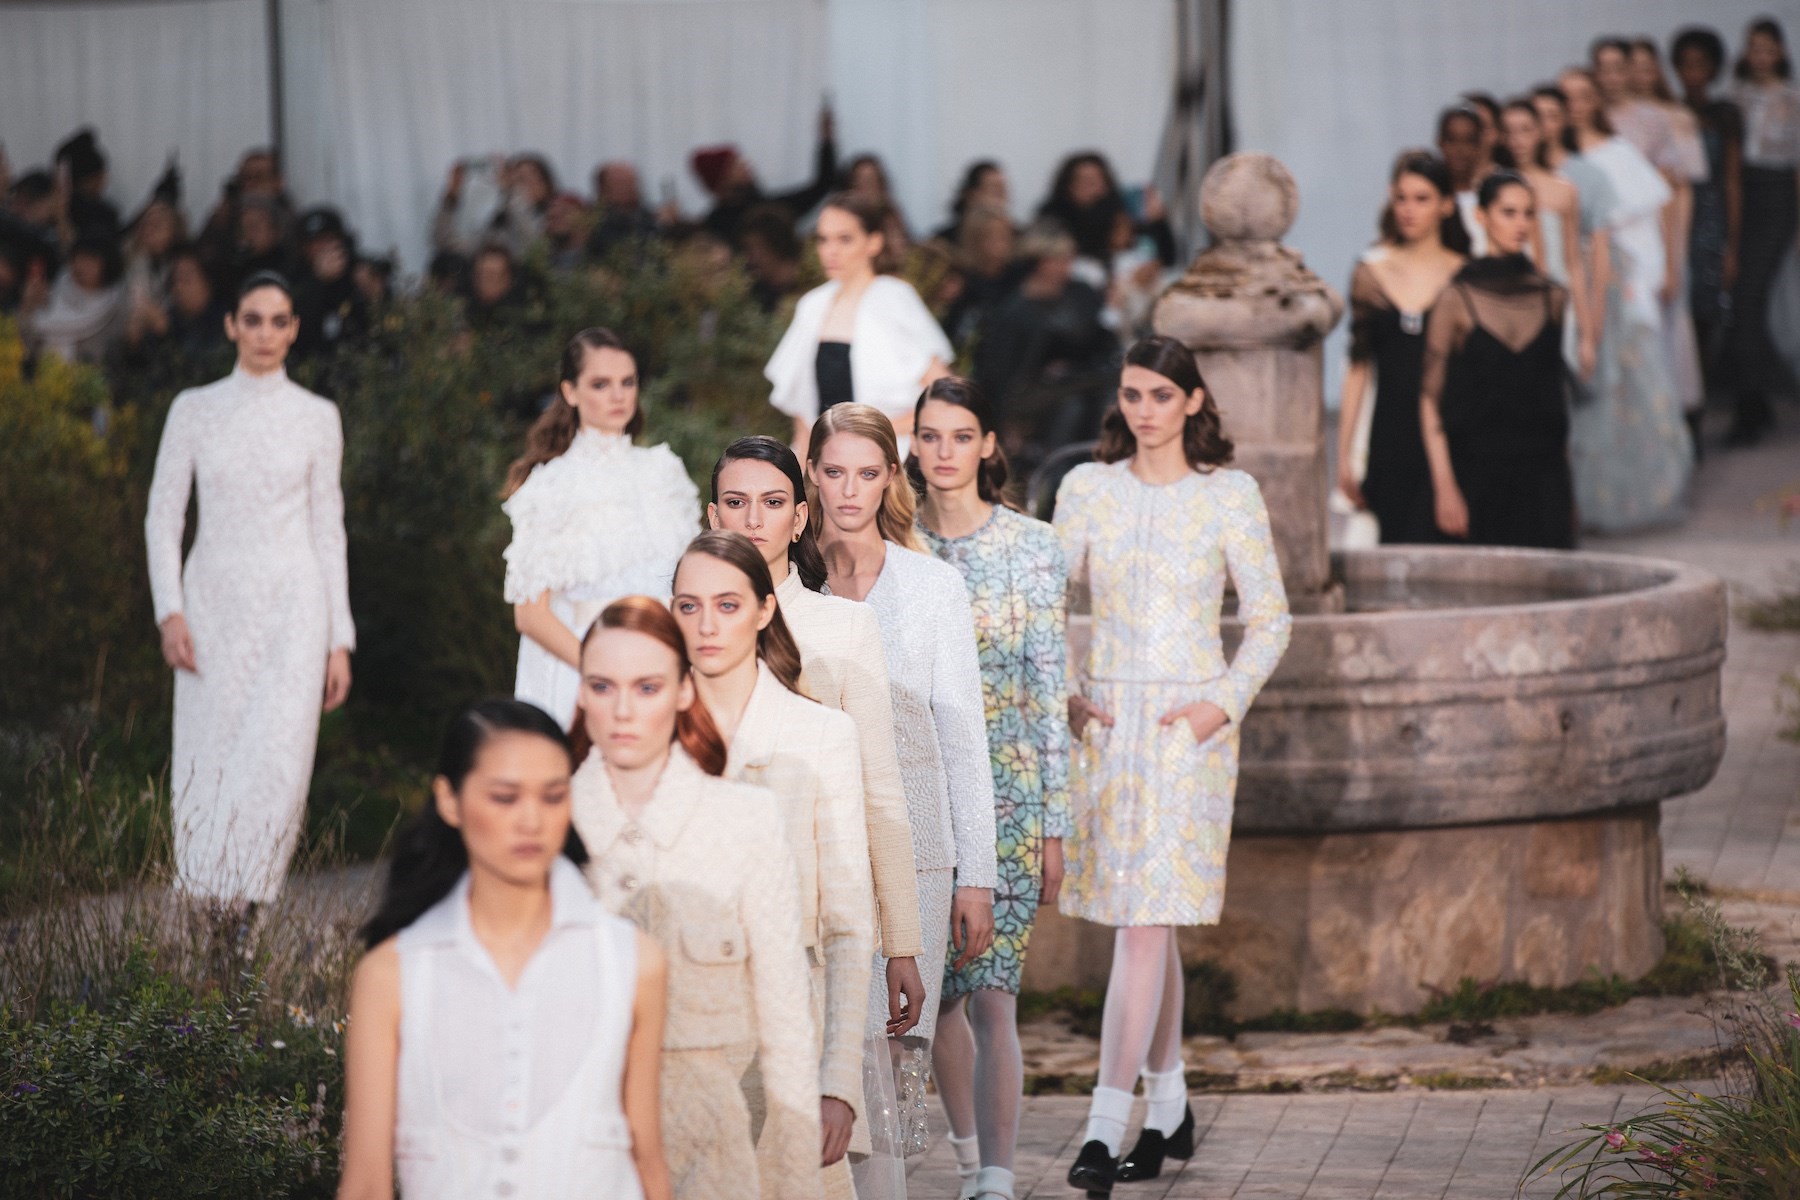 Chanel's Haute Couture Show Draws on Coco Chanel's Cloistered Childhood